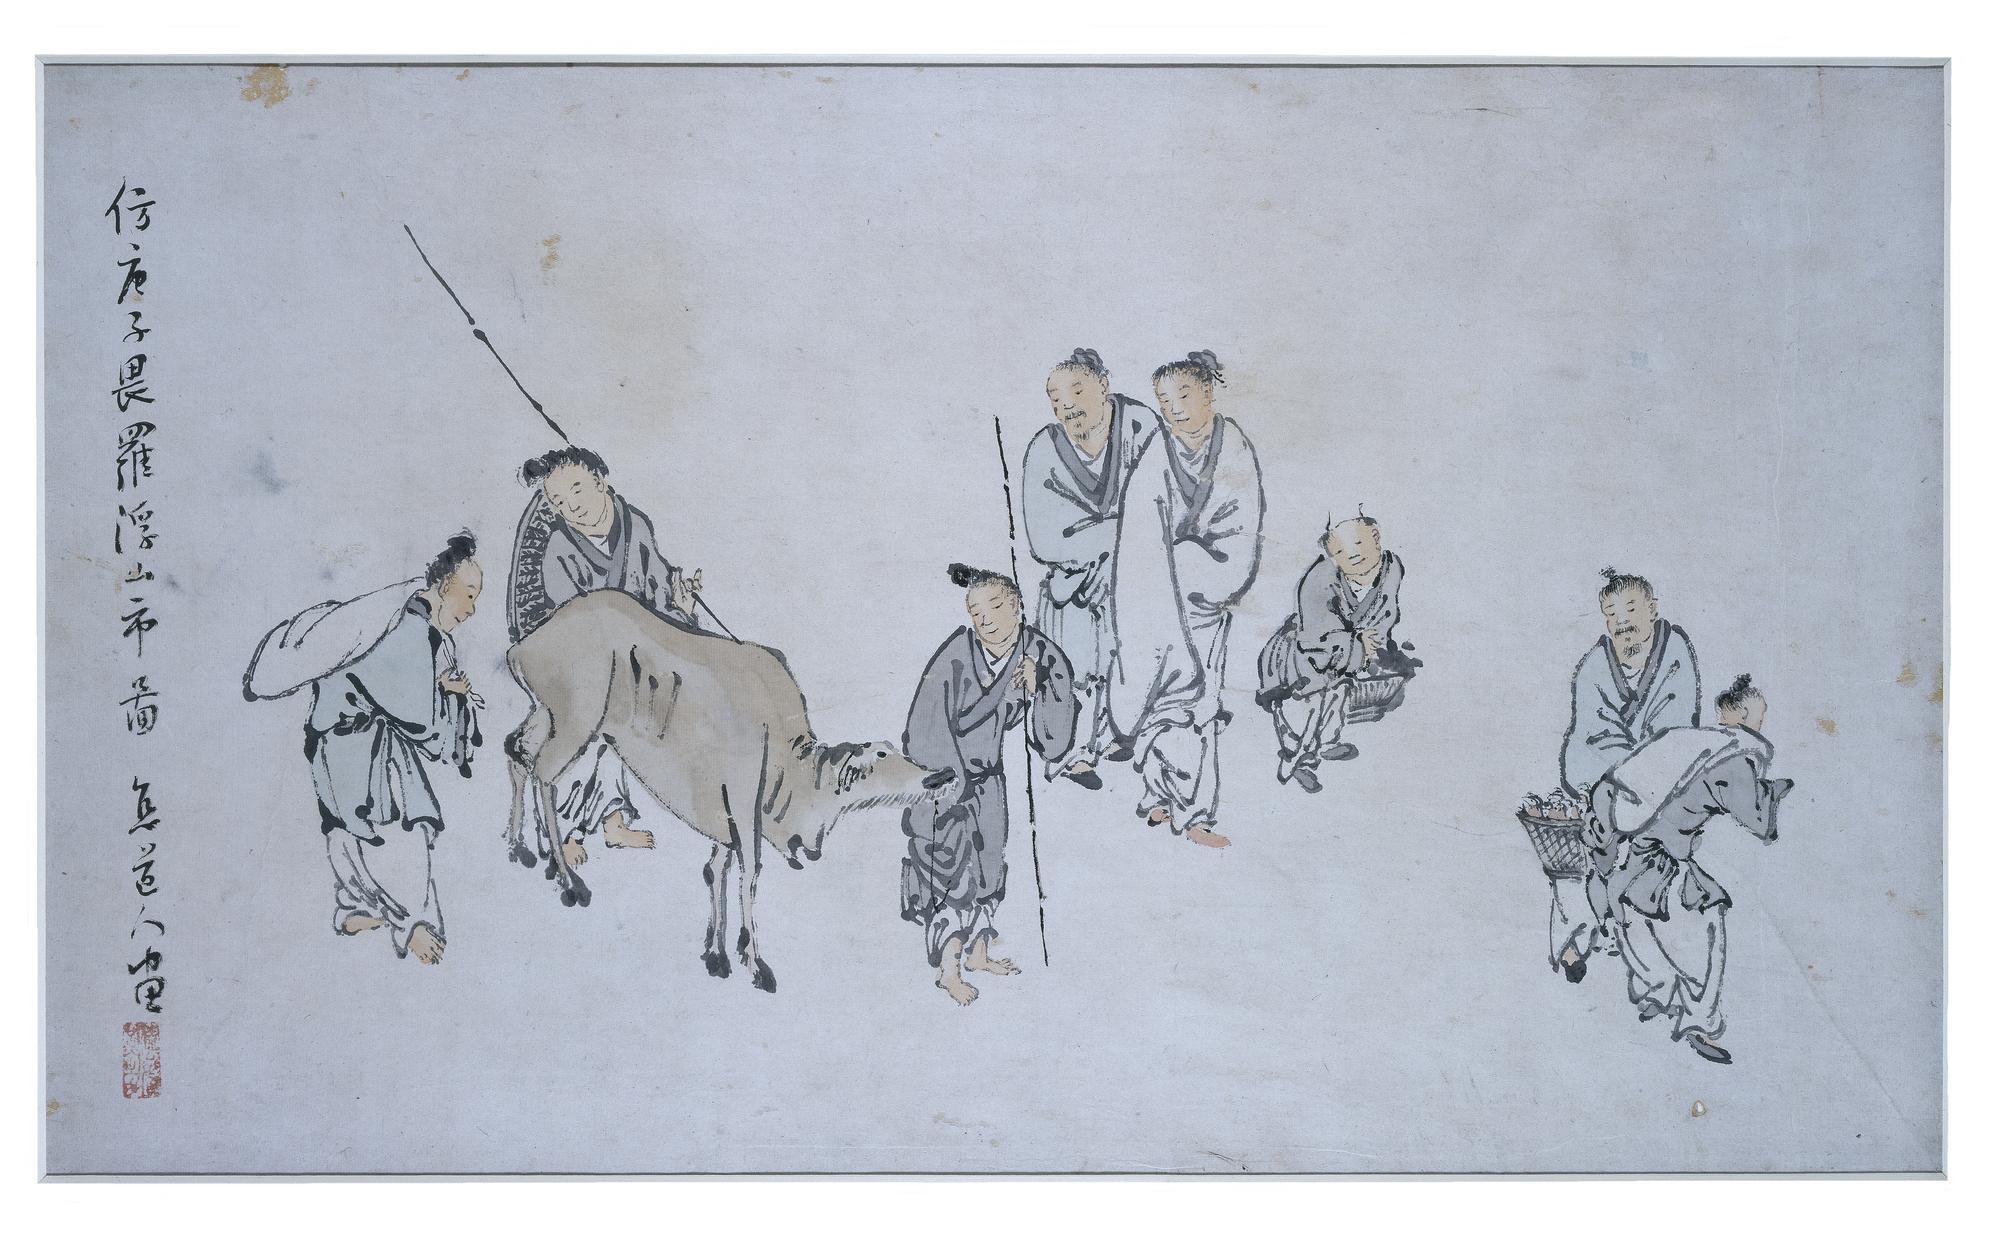  Painting of market day at the Lou Fou Hills, in ink and colour on paper: China, by Liu Tian. Collected by Sir James Stewart Lockhart. With permission of George Watson's College.